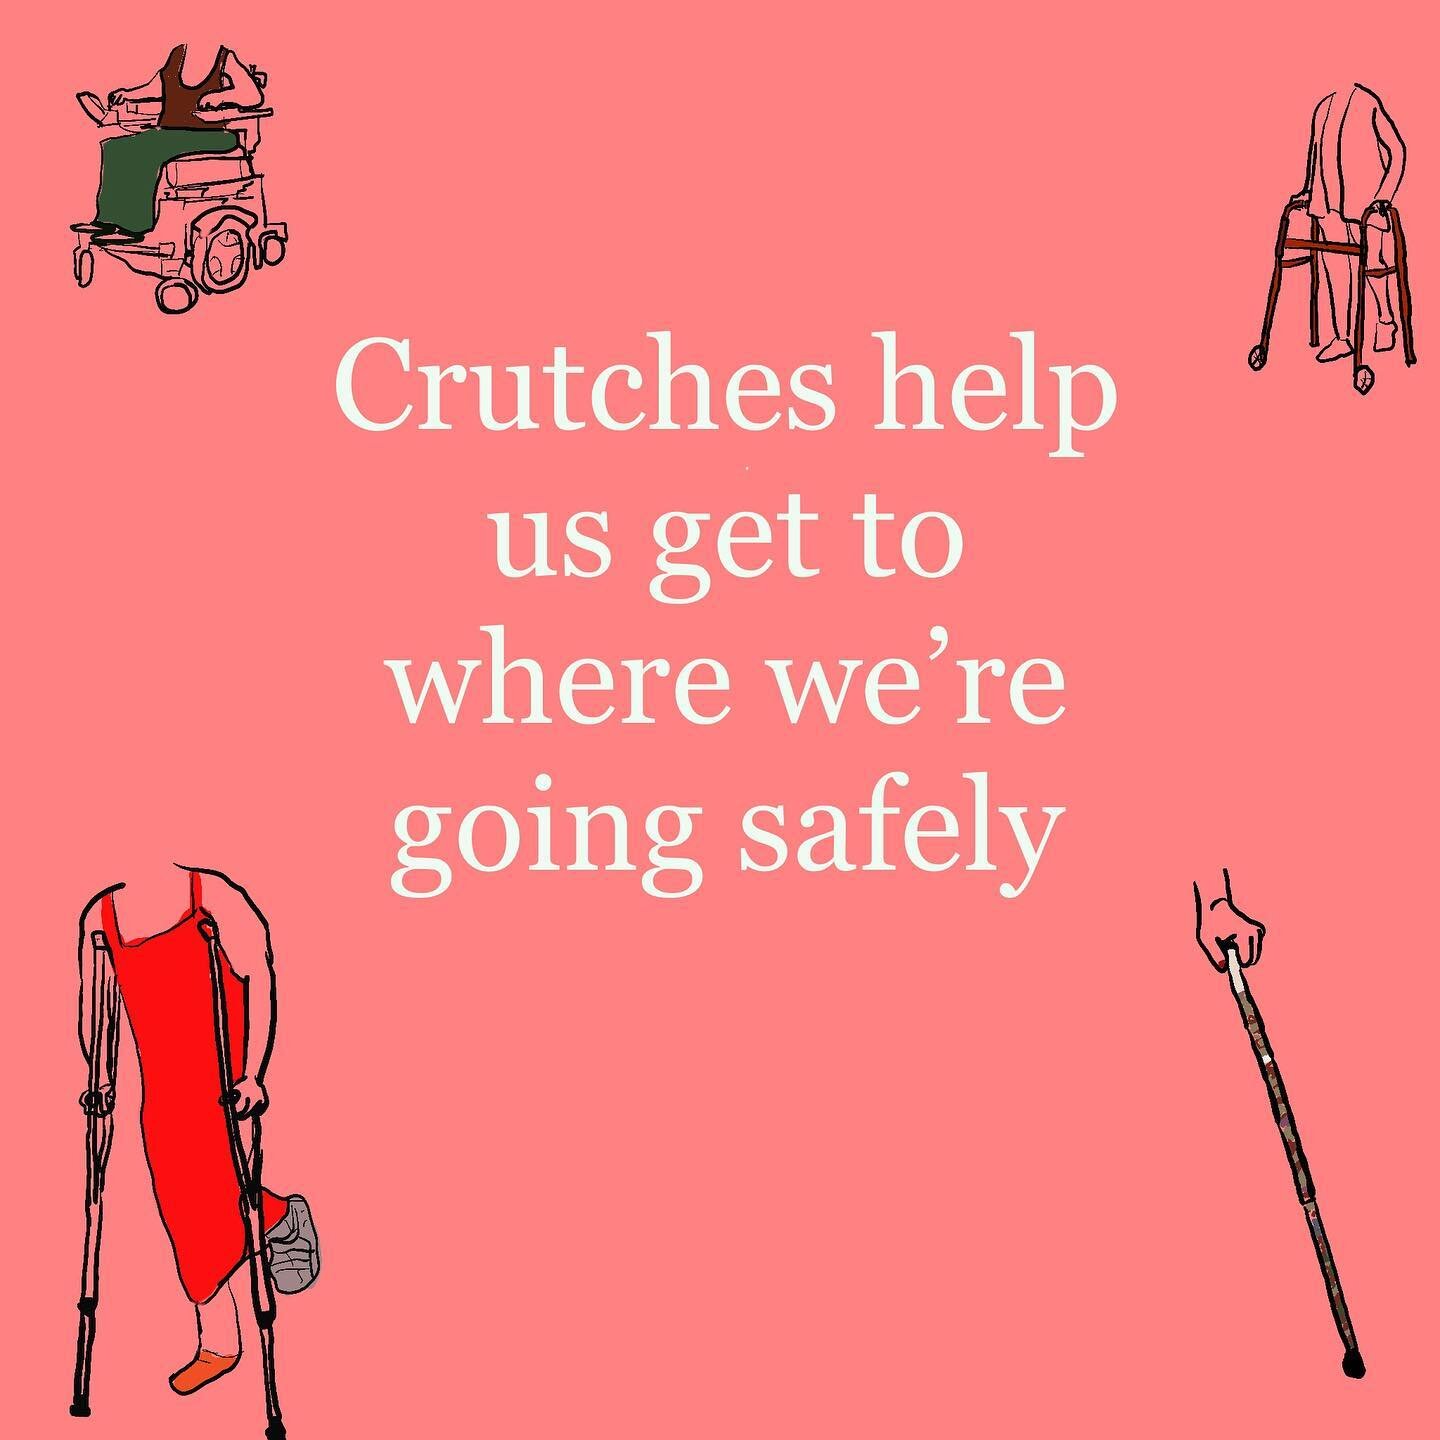 Crutches help us get to where we&rsquo;re going safely. One thing we hear in therapy, or about therapy, often is, &ldquo;i don&rsquo;t want to use &lsquo;it&rsquo; as a crutch.&rdquo; A friendly reminder that crutches are good things, they help us ge